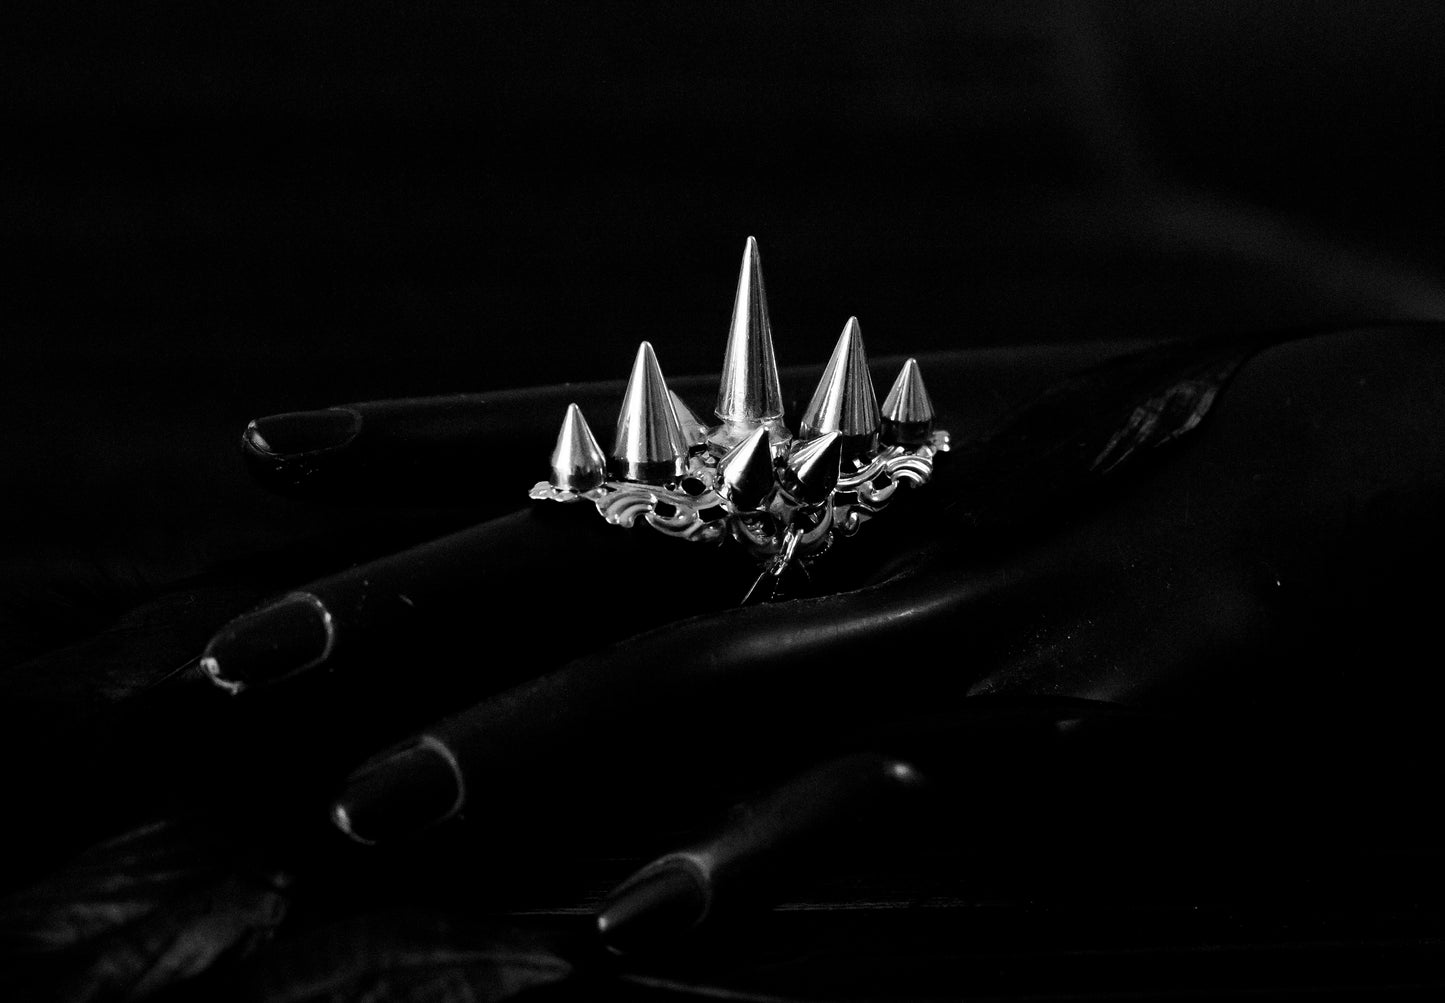 Myril Jewels' punk studded ring is a bold statement piece, meticulously crafted with a fierce array of silver spikes rising in a crown-like silhouette. This ring is a quintessential emblem of Neo Gothic style, designed for those who embody the gothic-chic lifestyle. Ideal for Halloween, it's a standout accessory for everyday wear by those who favor the Witchcore aesthetic, and a must-have for any minimal goth or Whimsigoth-inspired collection